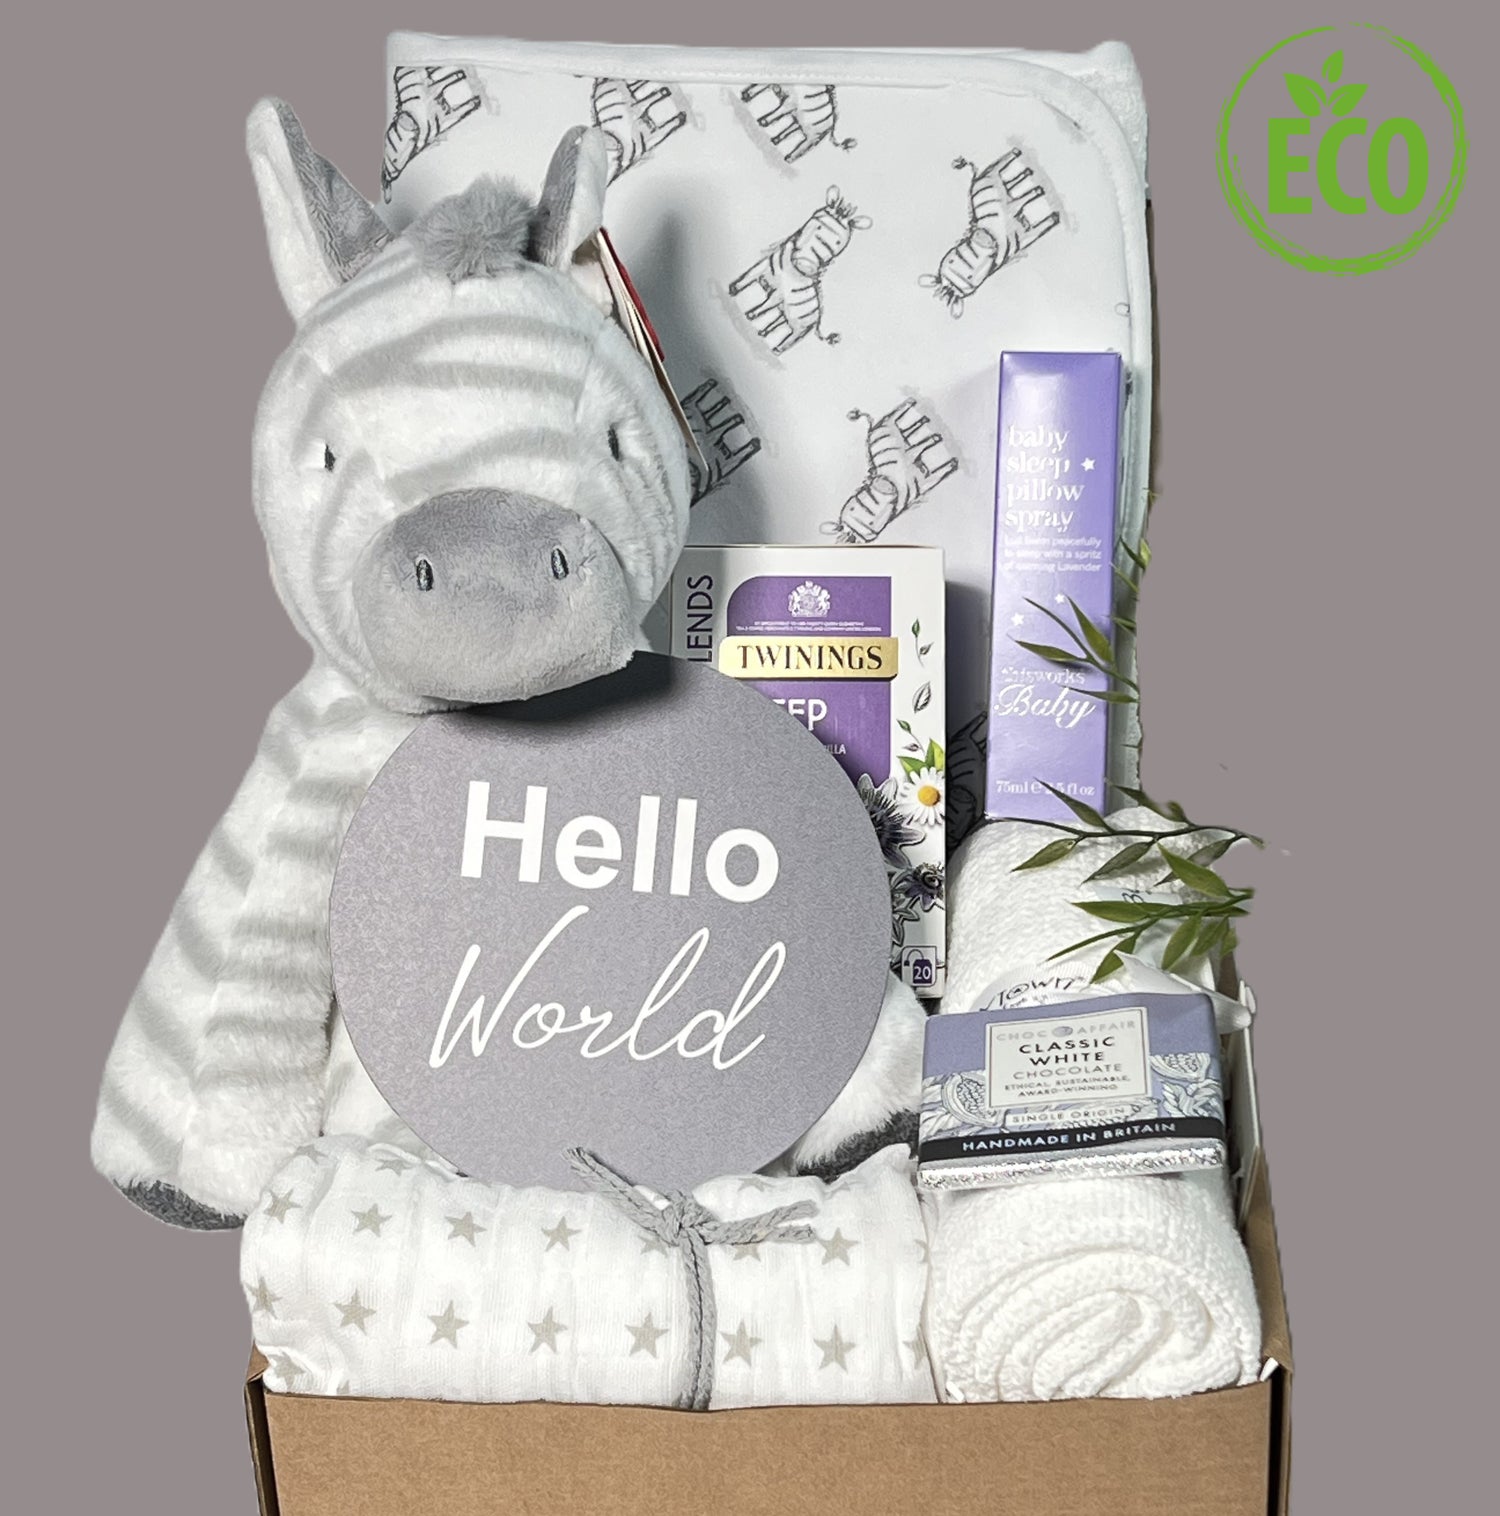 Unisex eco friendly new baby hamper containing a zebra print hooded baby towel, a zebra soft baby toy, a white cellular baby blanket, a bottle of "This Works" baby pillow spray, a packet of Twining "Sleep" teabags and a bar of chocolate.